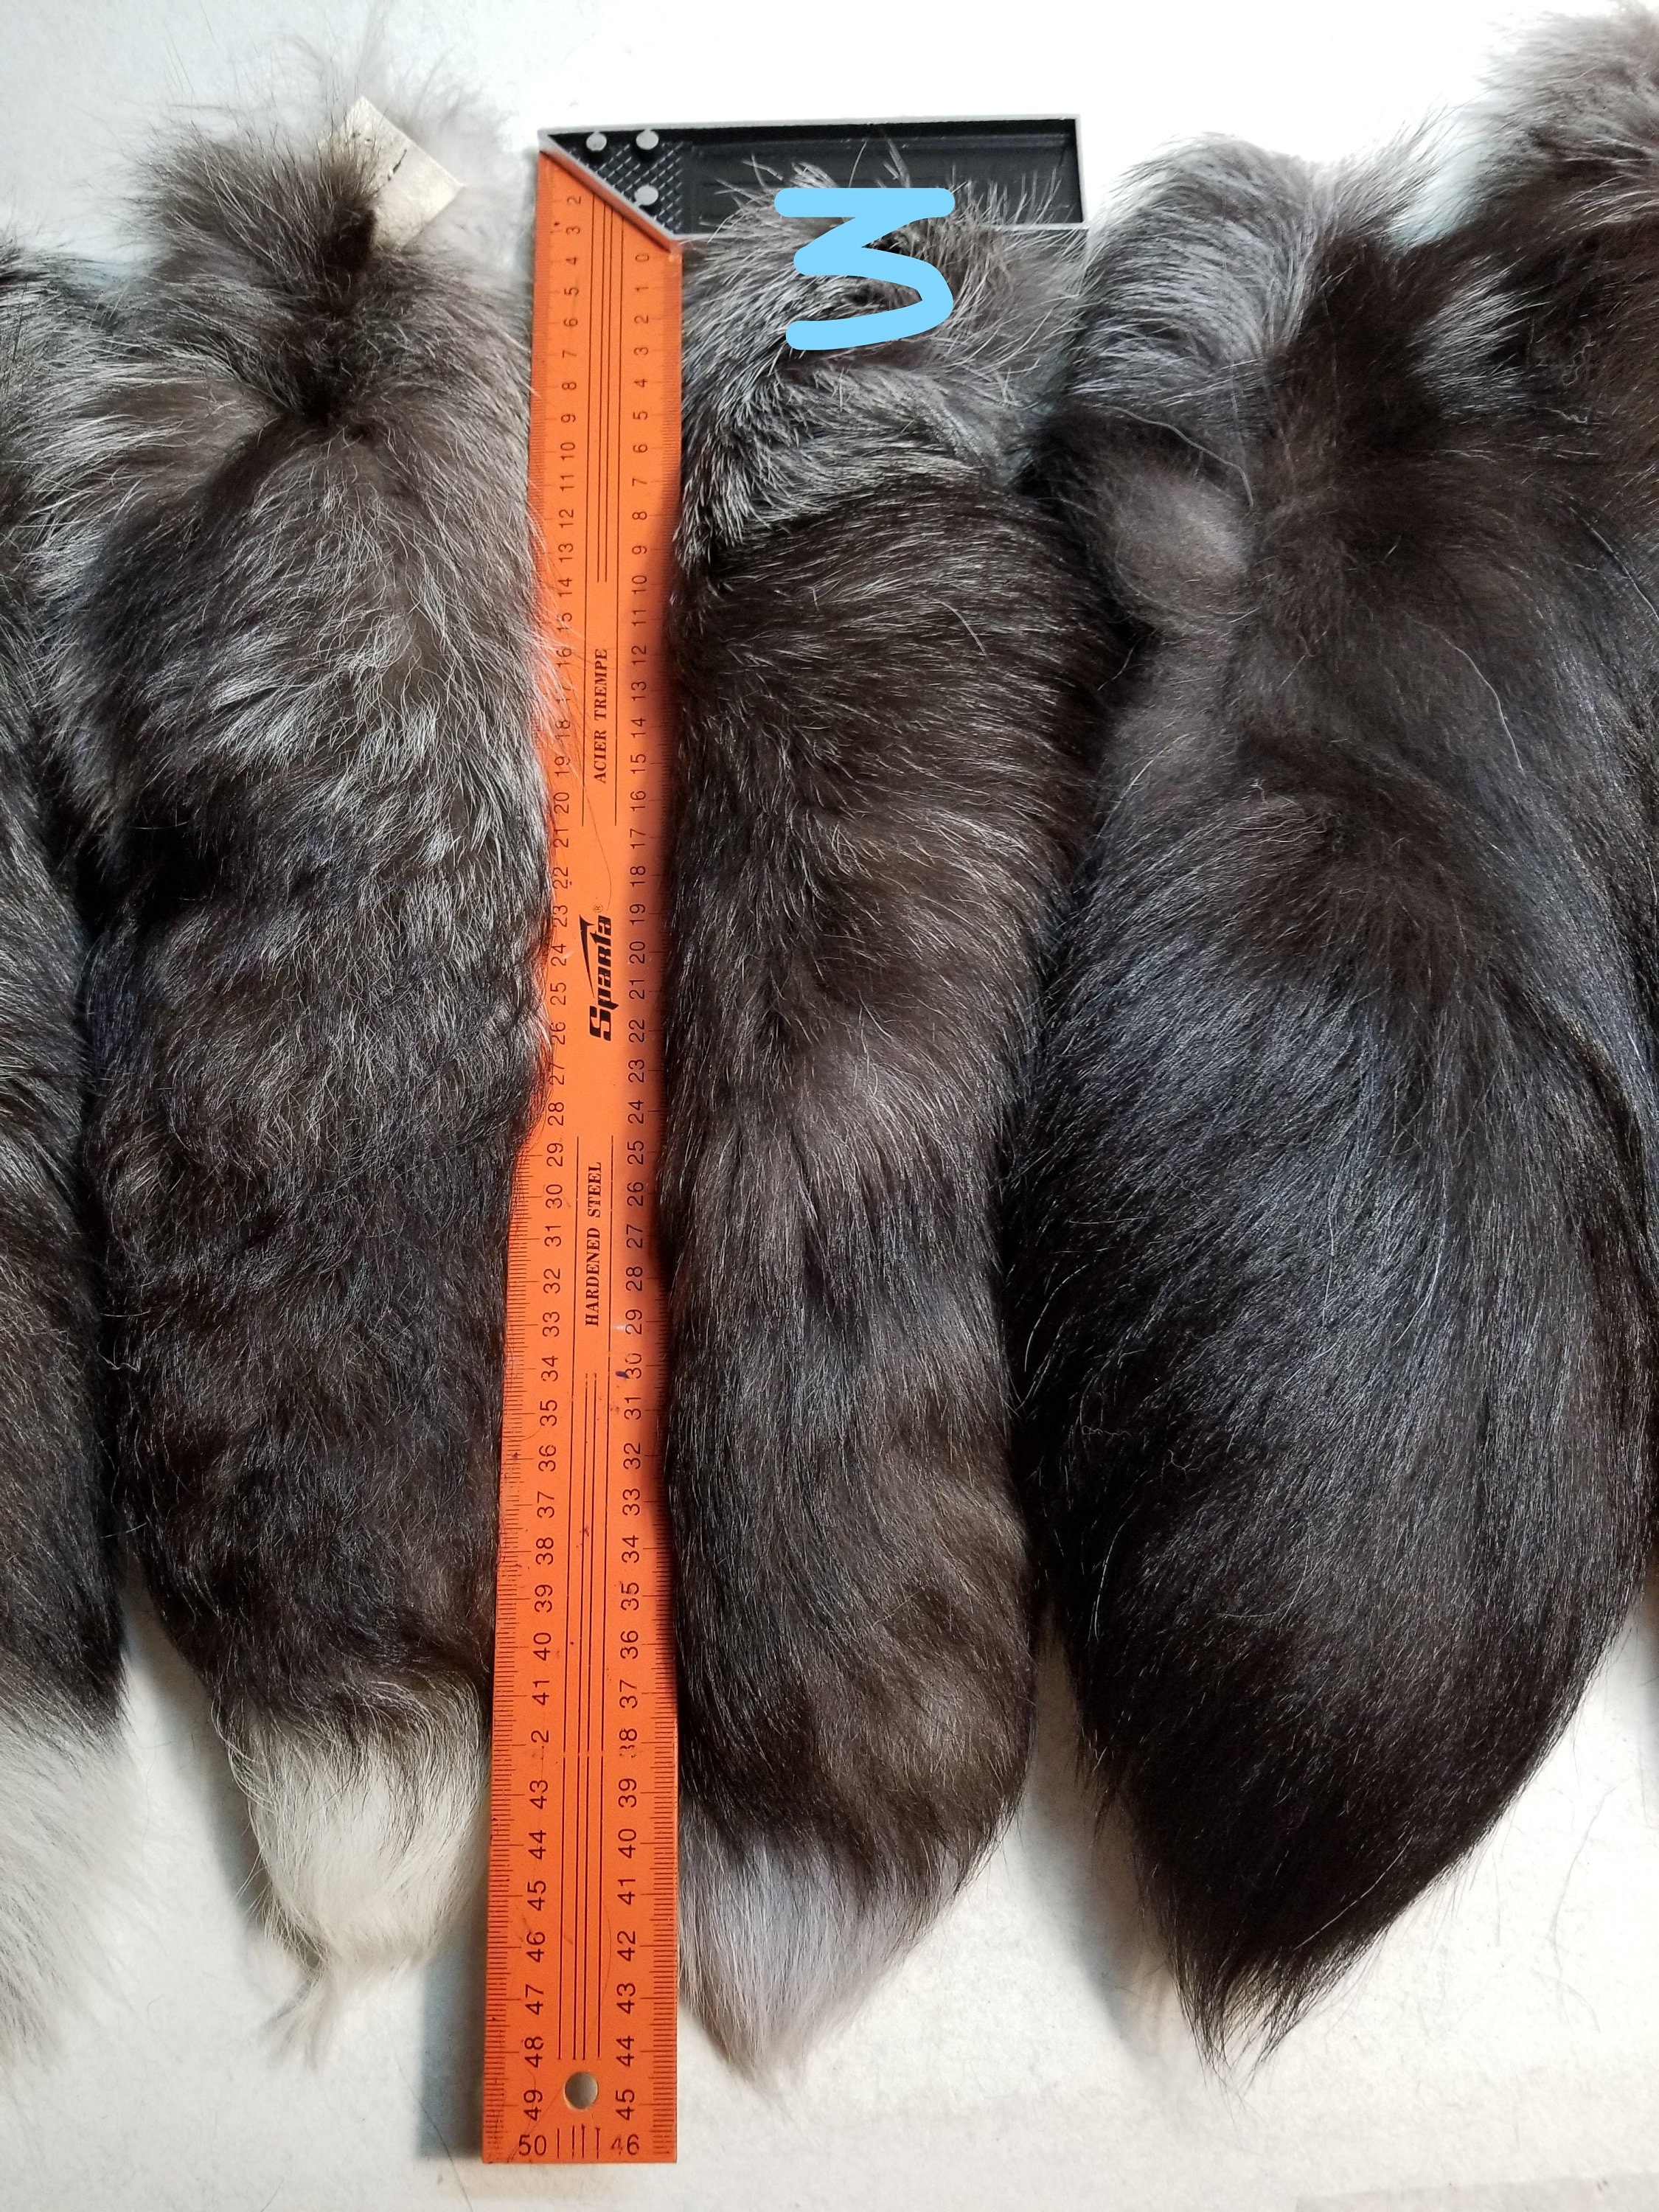 Large Silver Fox tail fox tail silver fox tail fur tail | Etsy